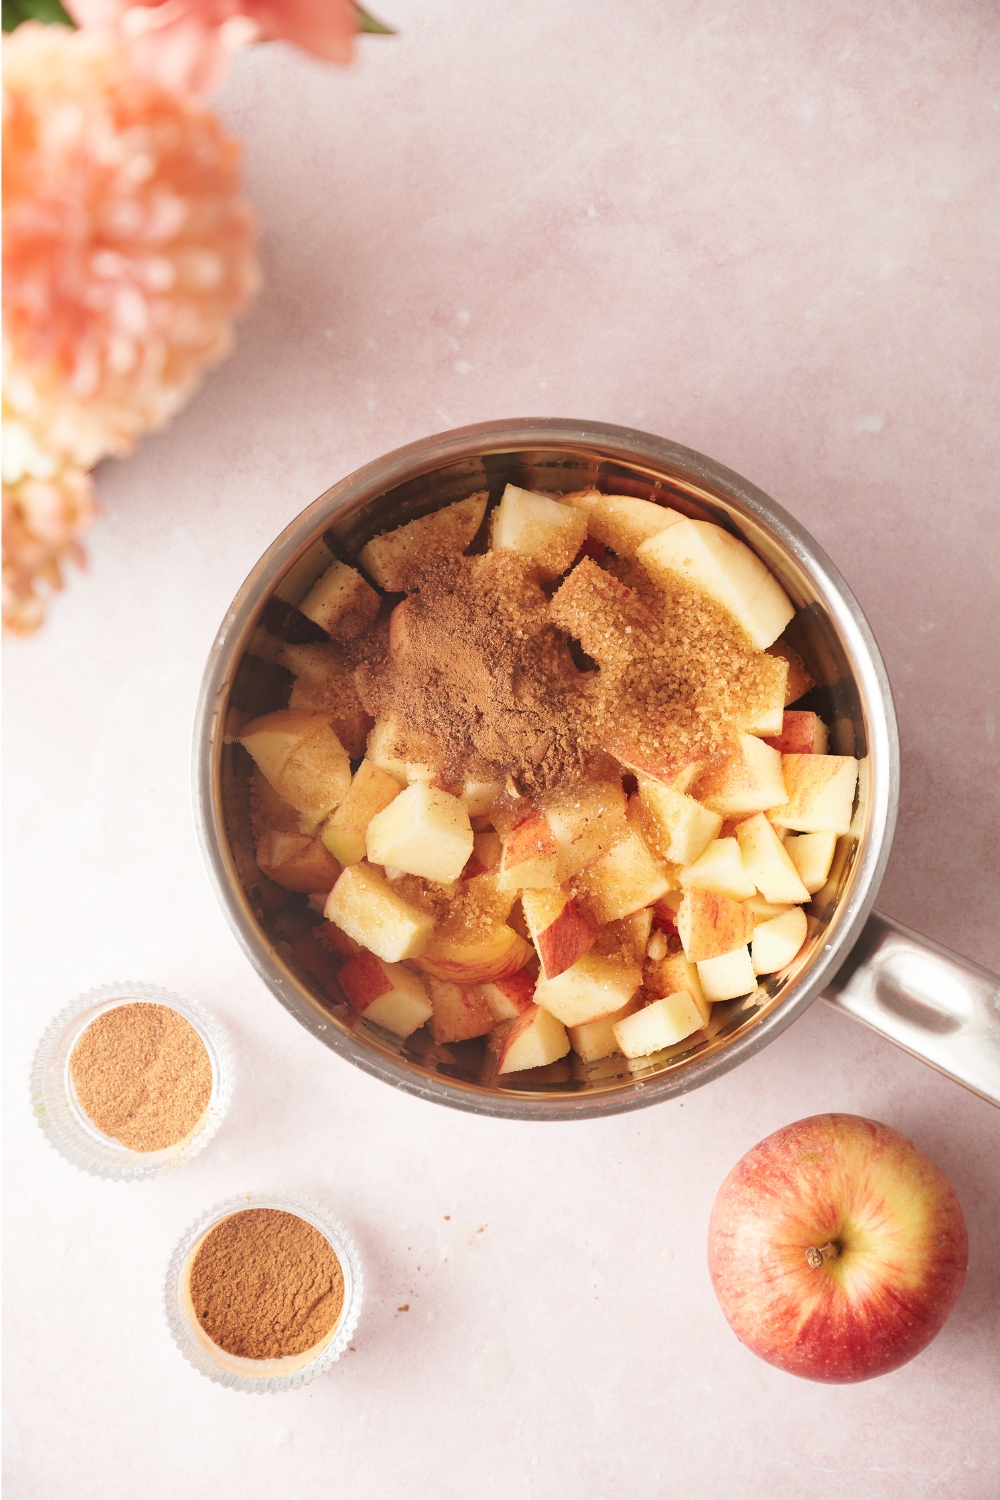 A pot with diced apples and seasonings.